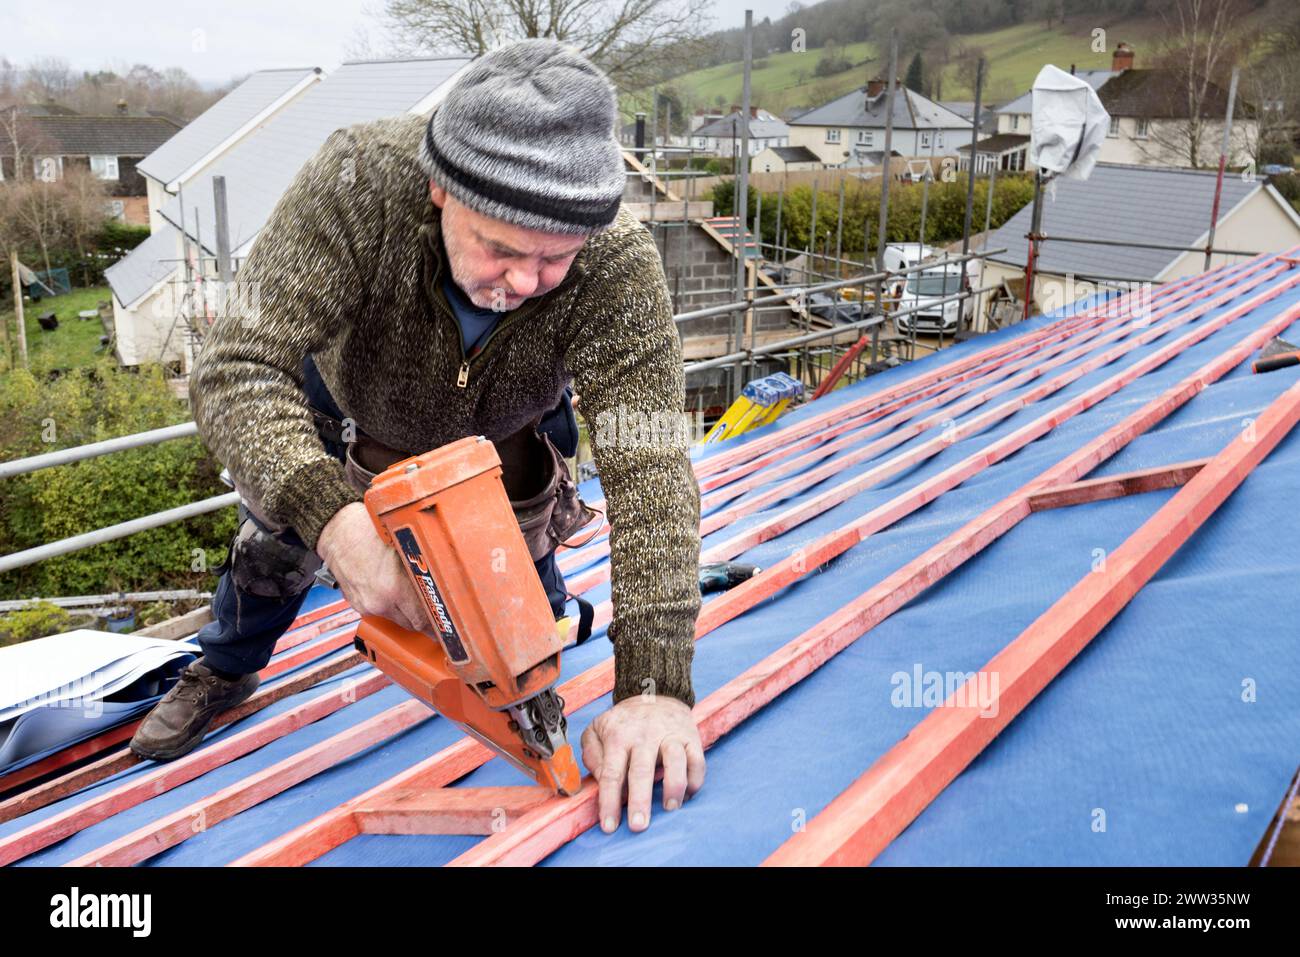 Roofer using a nail gun to fix batons on a new house roof, Llanfoist, Wales, UK Stock Photo